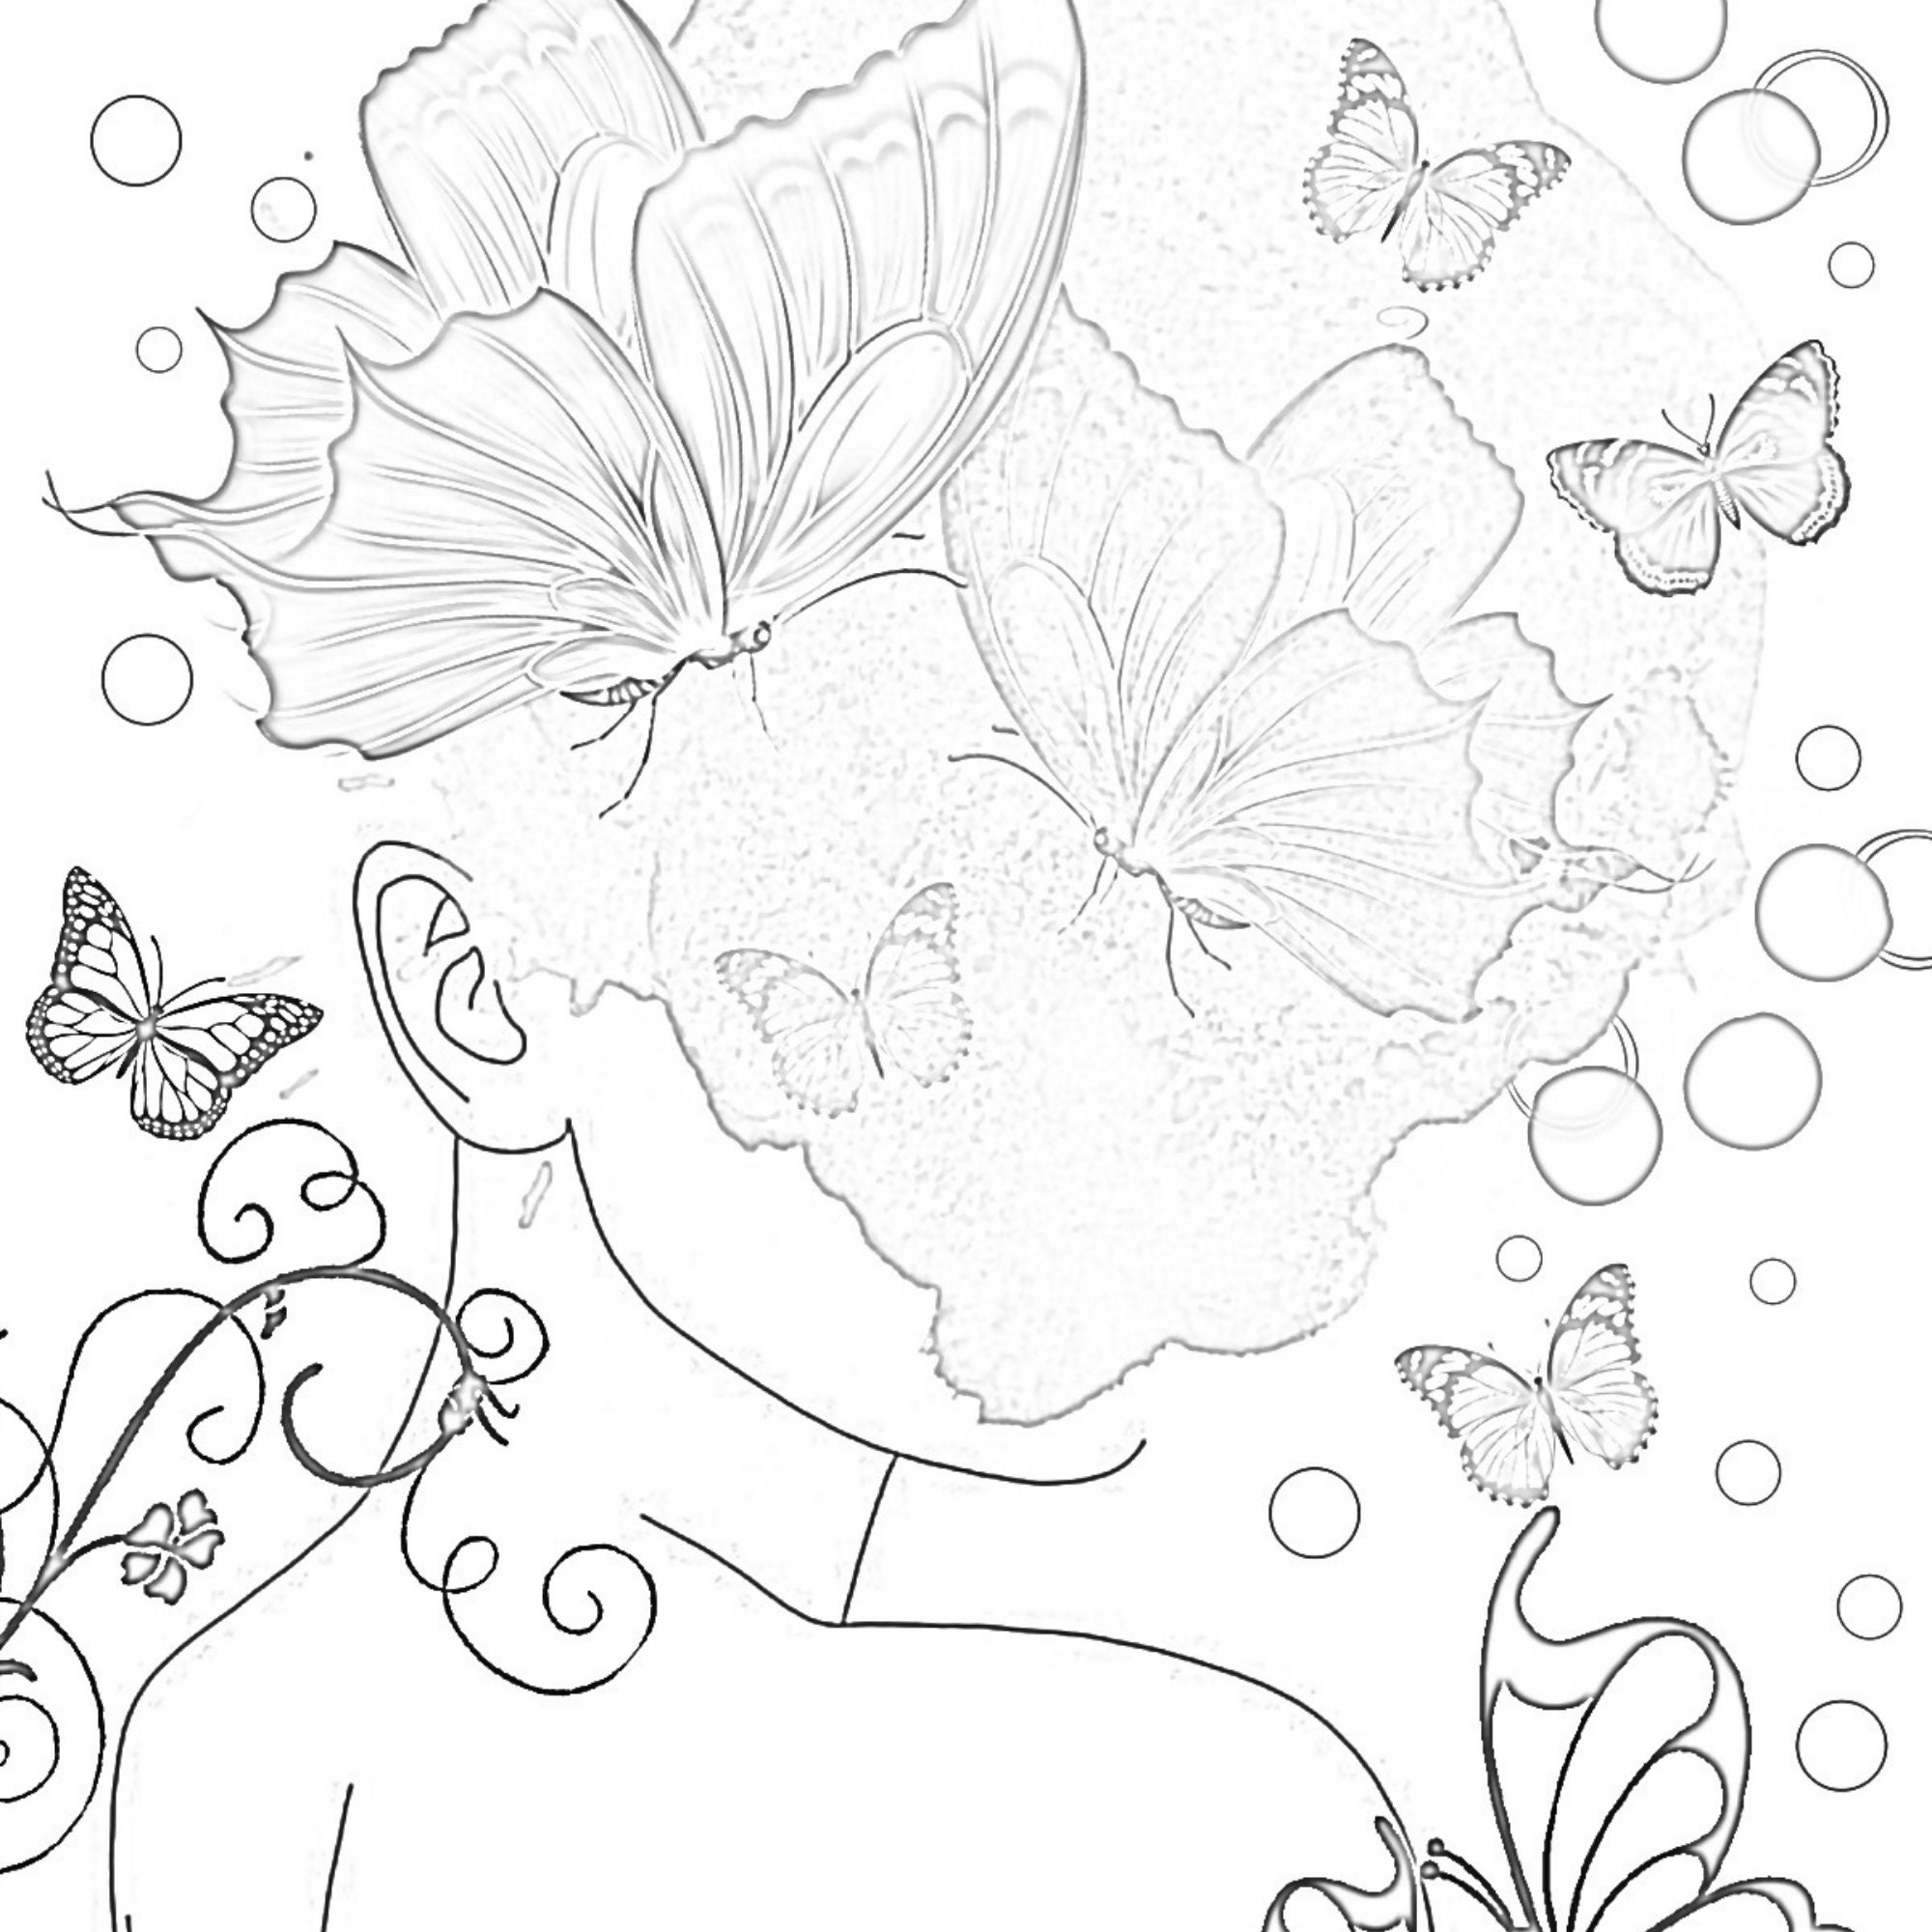 Custom Designed Coloring Page Instant Download Printable | Etsy